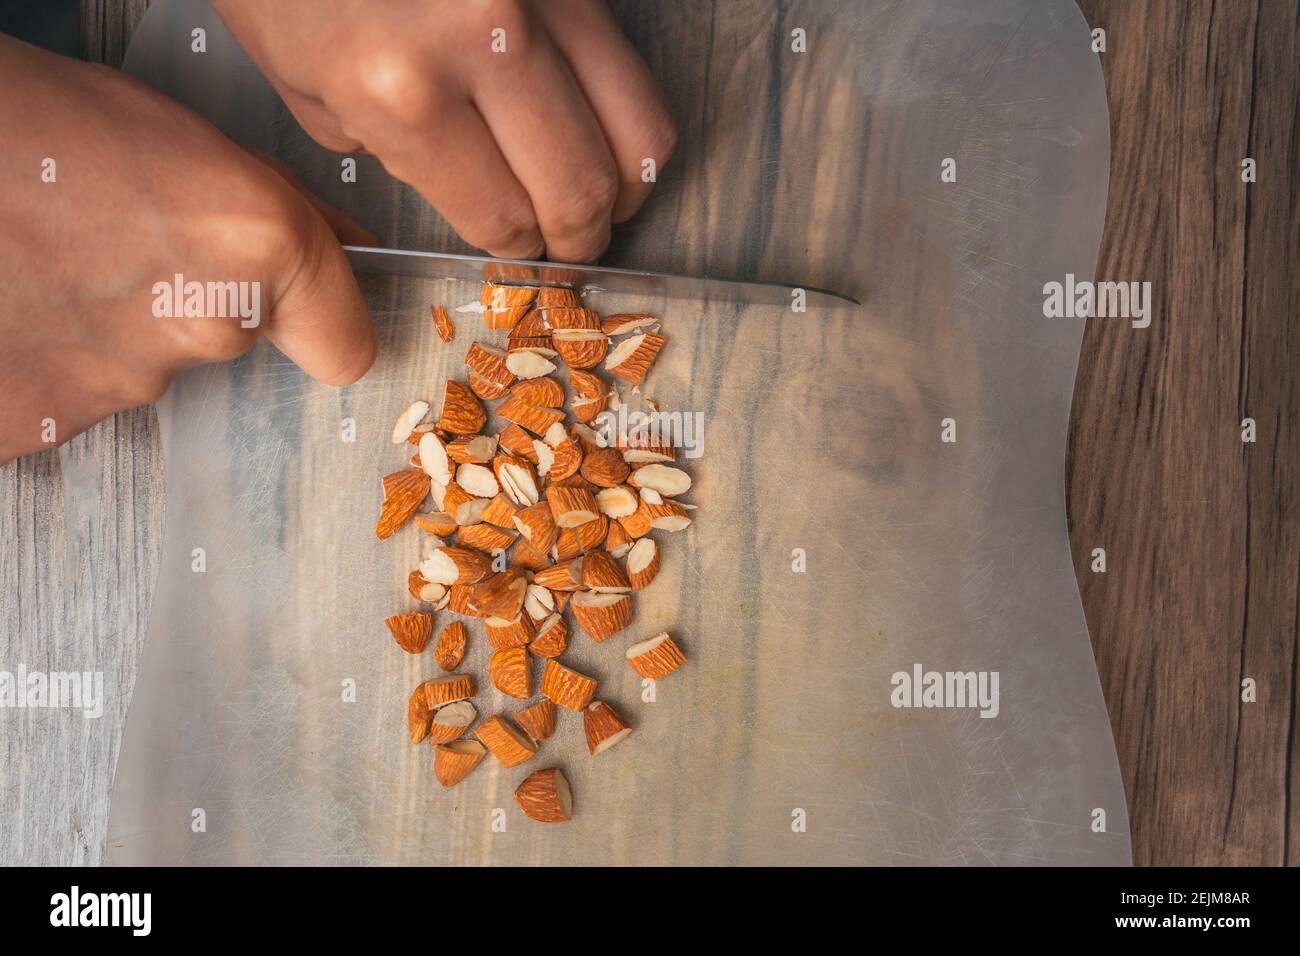 Close-up of a person with kitchen knife cutting almonds in his kitchen Stock Photo